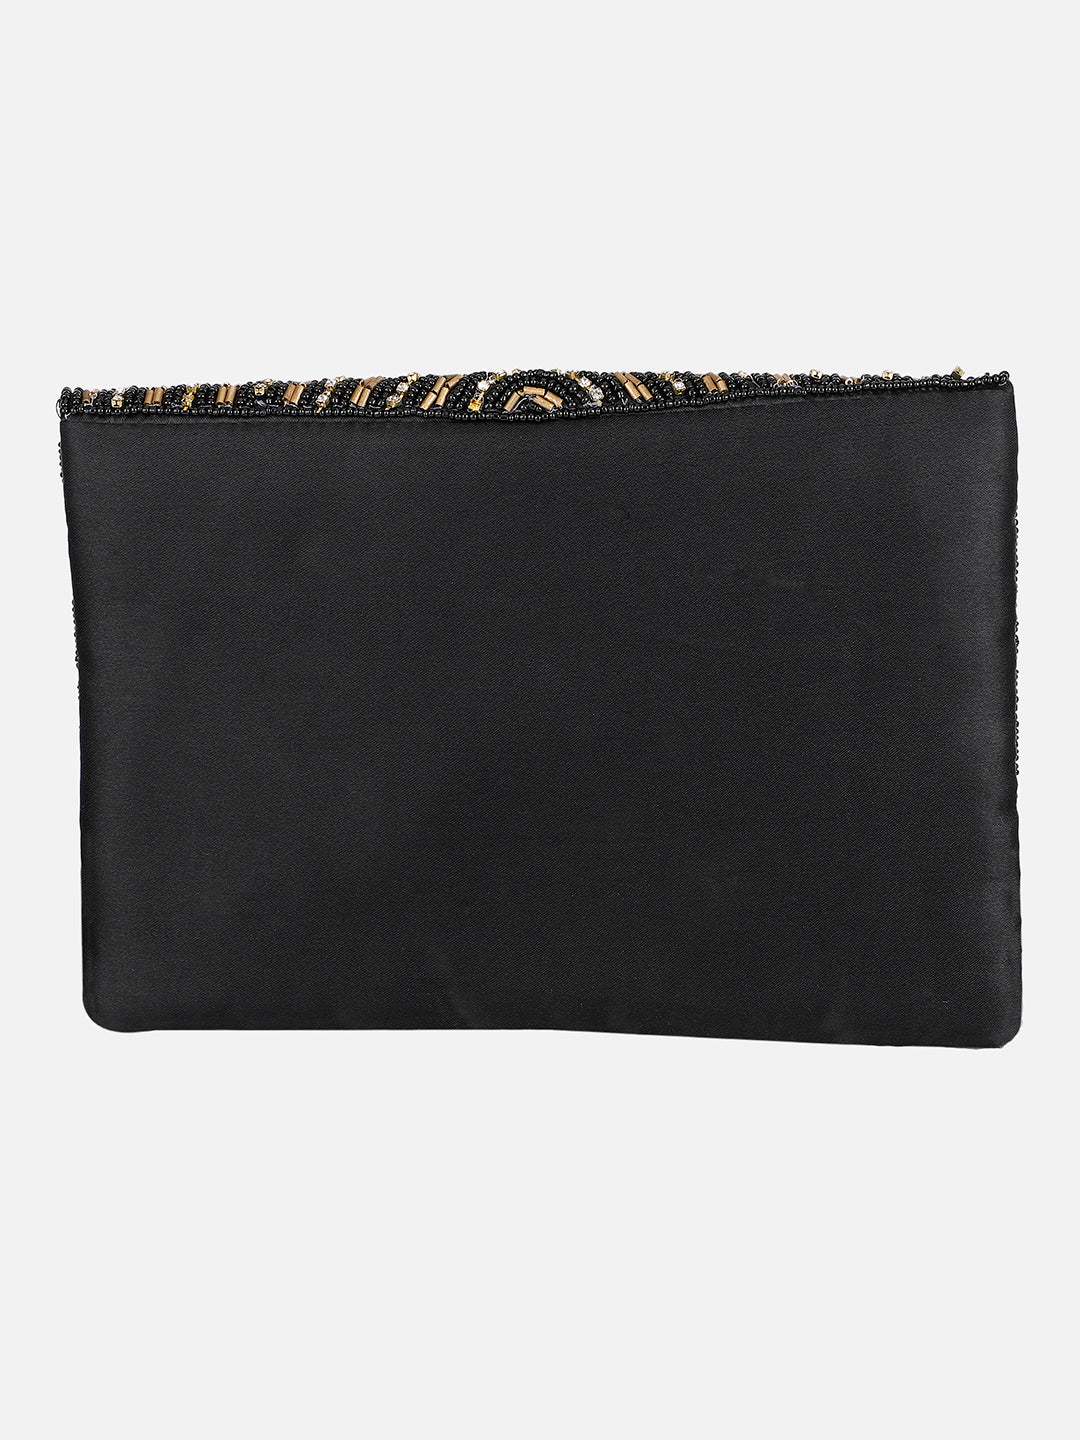 Embroidered Black and Golden Clutch